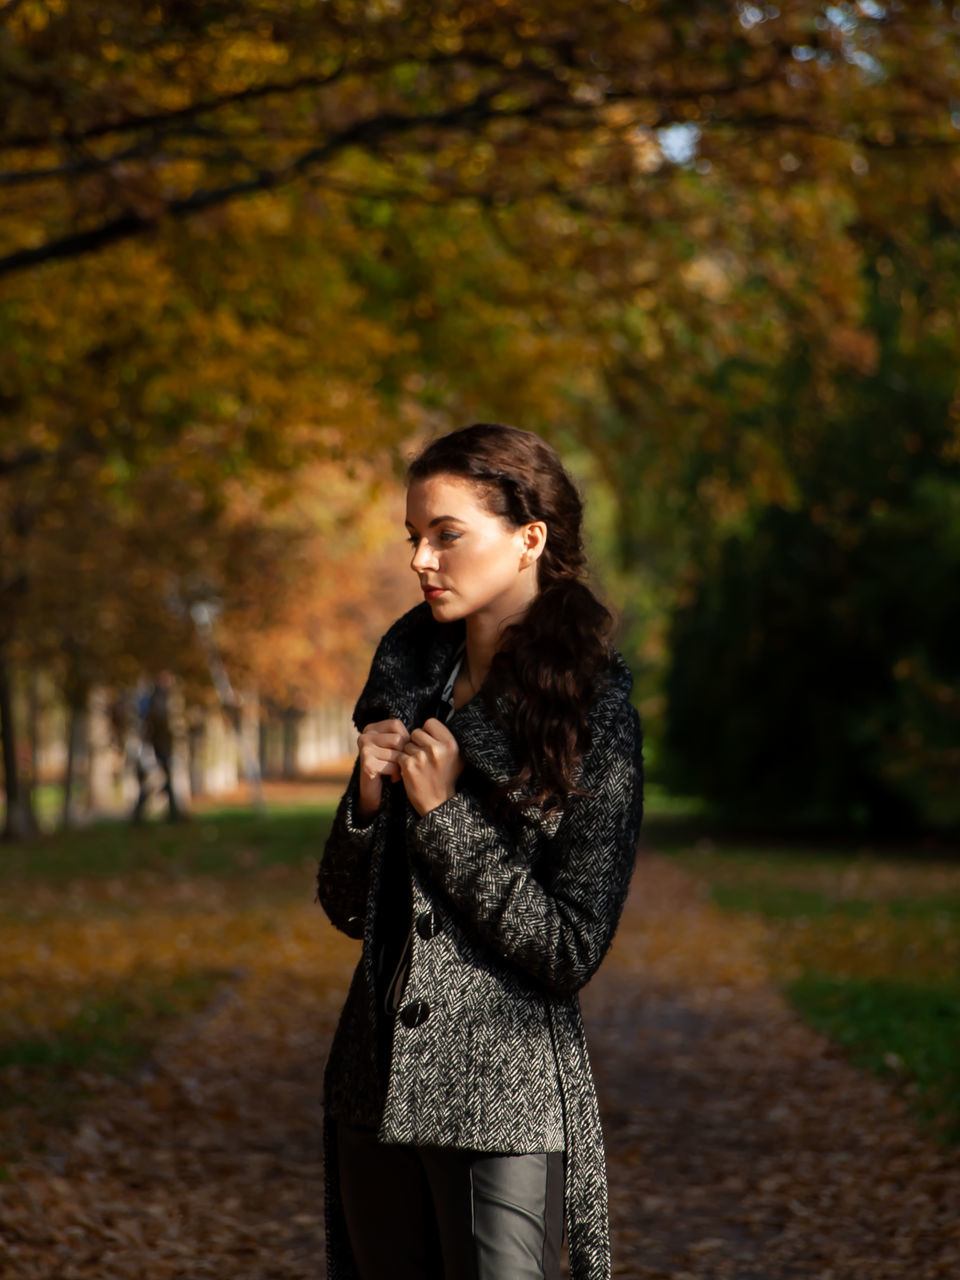 one person, autumn, young adult, tree, three quarter length, young women, focus on foreground, standing, real people, lifestyles, clothing, leisure activity, change, nature, front view, looking, plant, day, hairstyle, hair, contemplation, outdoors, teenager, beautiful woman, warm clothing